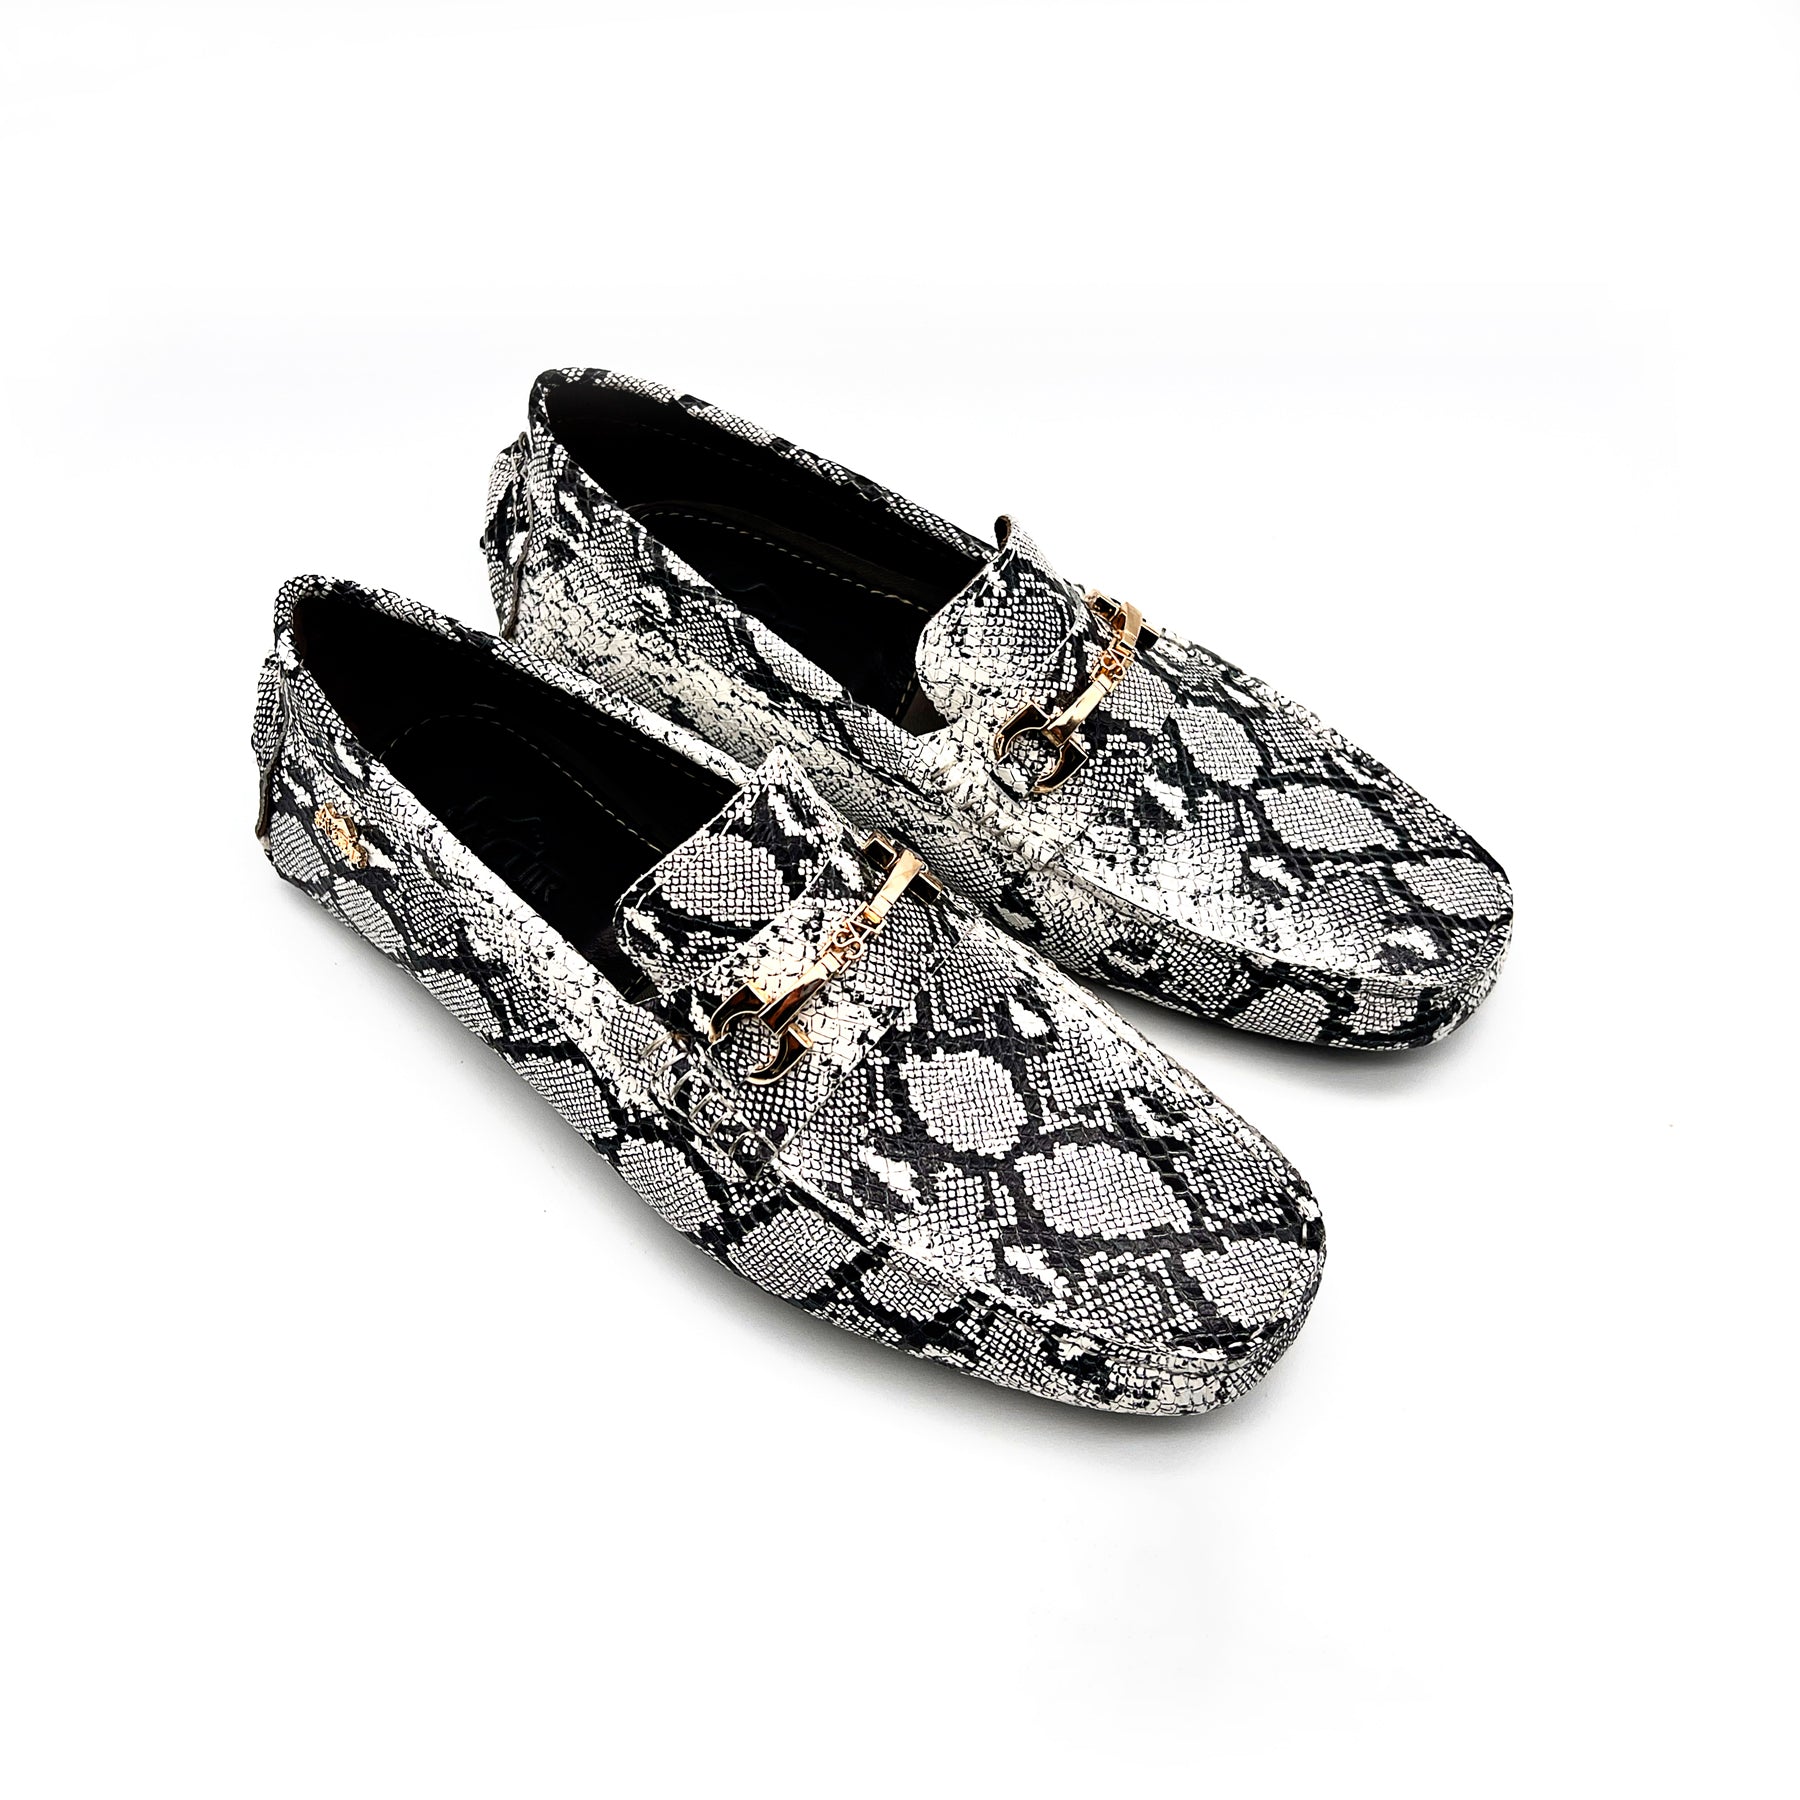 Italian Snake Print Leather Shoes